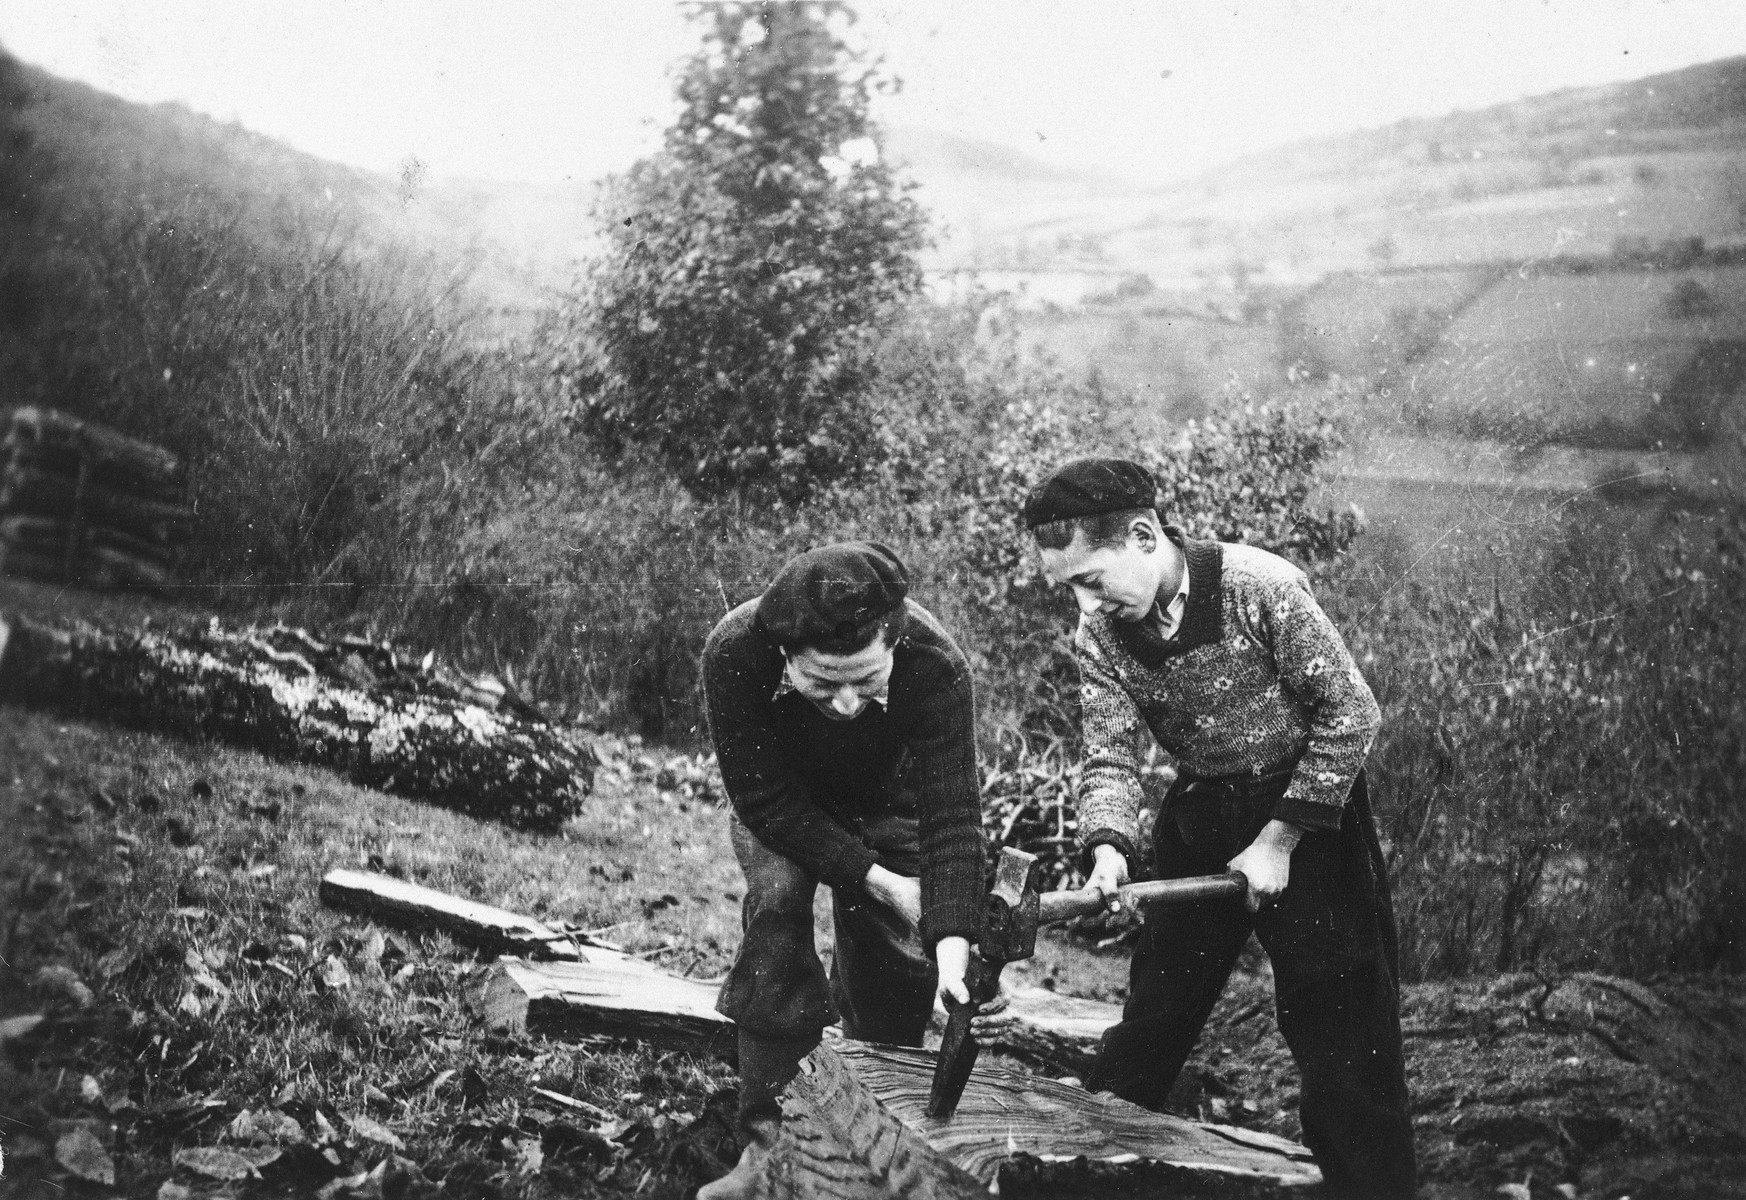 Two Jewish youths chop wood while living in hiding on a farm in Taluyers.

Alfred Bohem (left) survived and lives in Strassbourg and Robert Loeb is on the right.